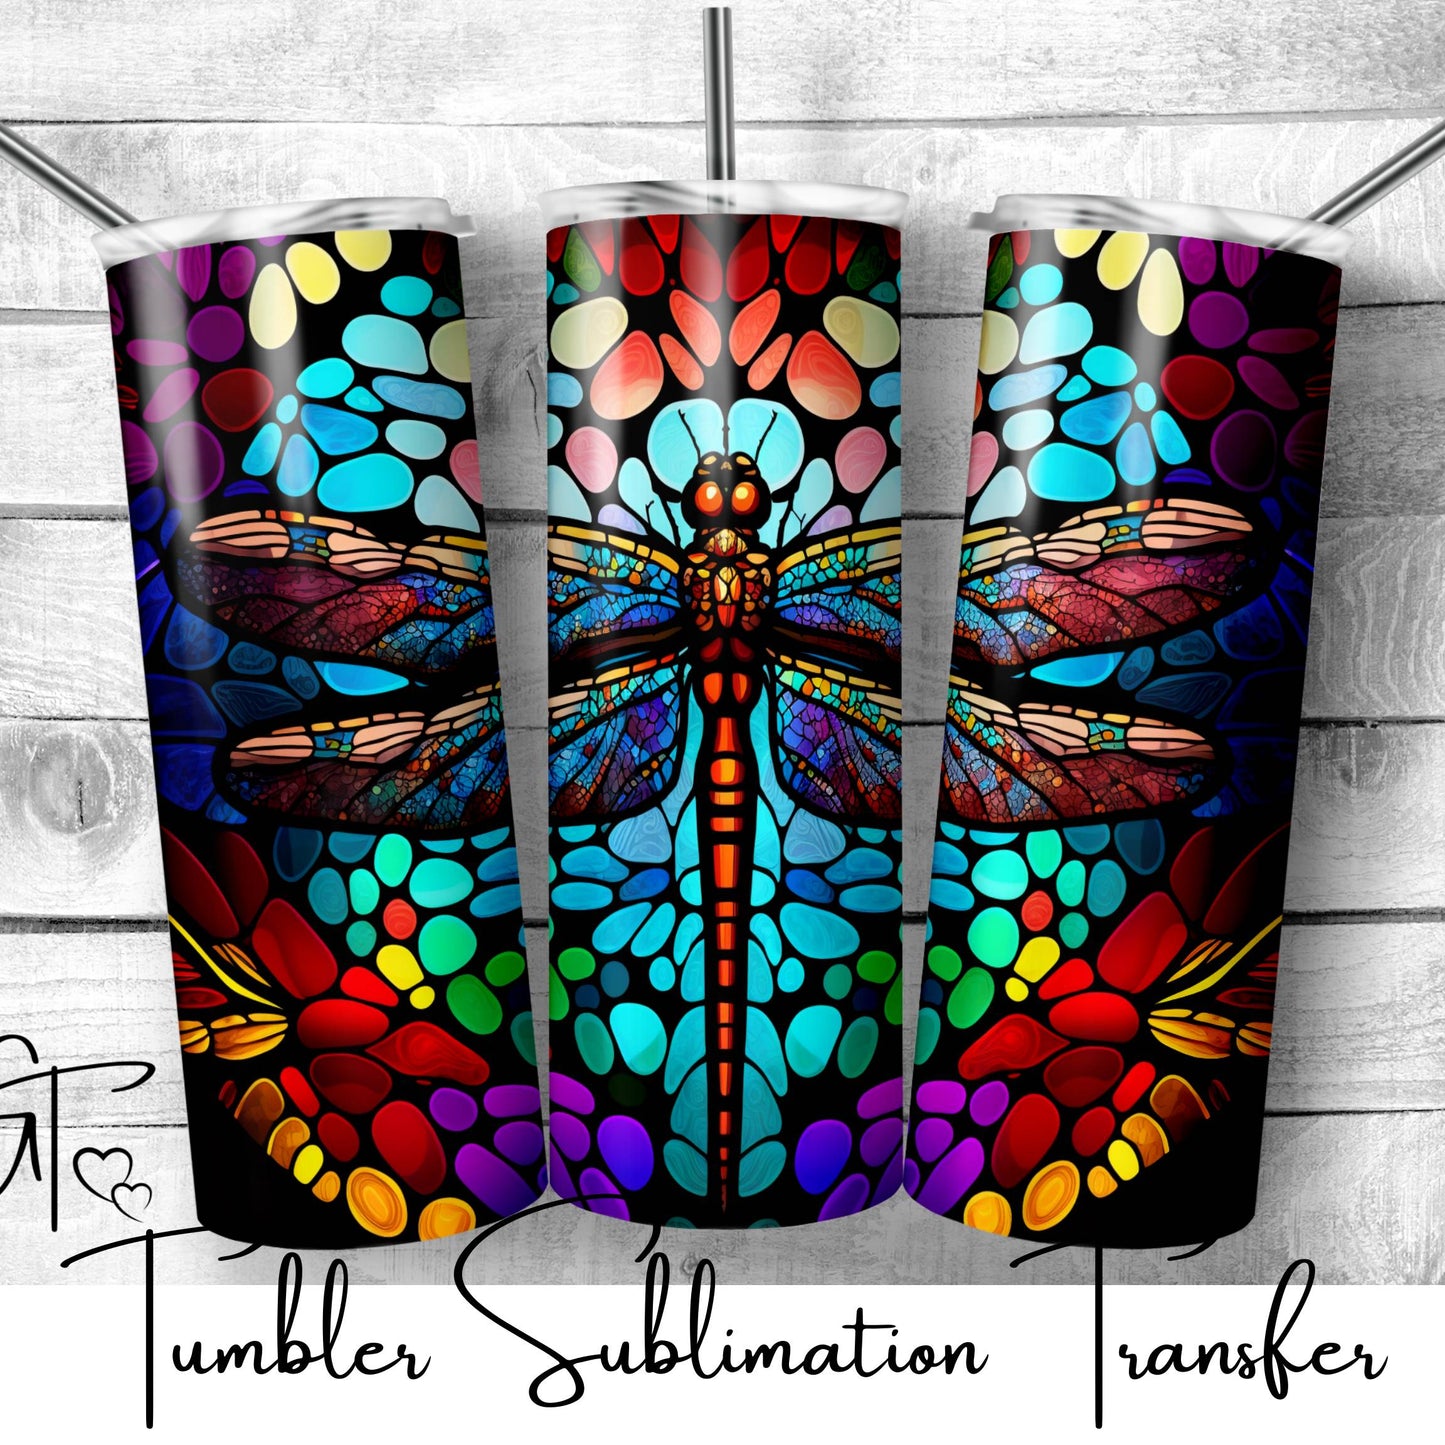 SUB798 Dragonfly Stained Glass Wildlife Animal Tumbler Sublimation Transfer